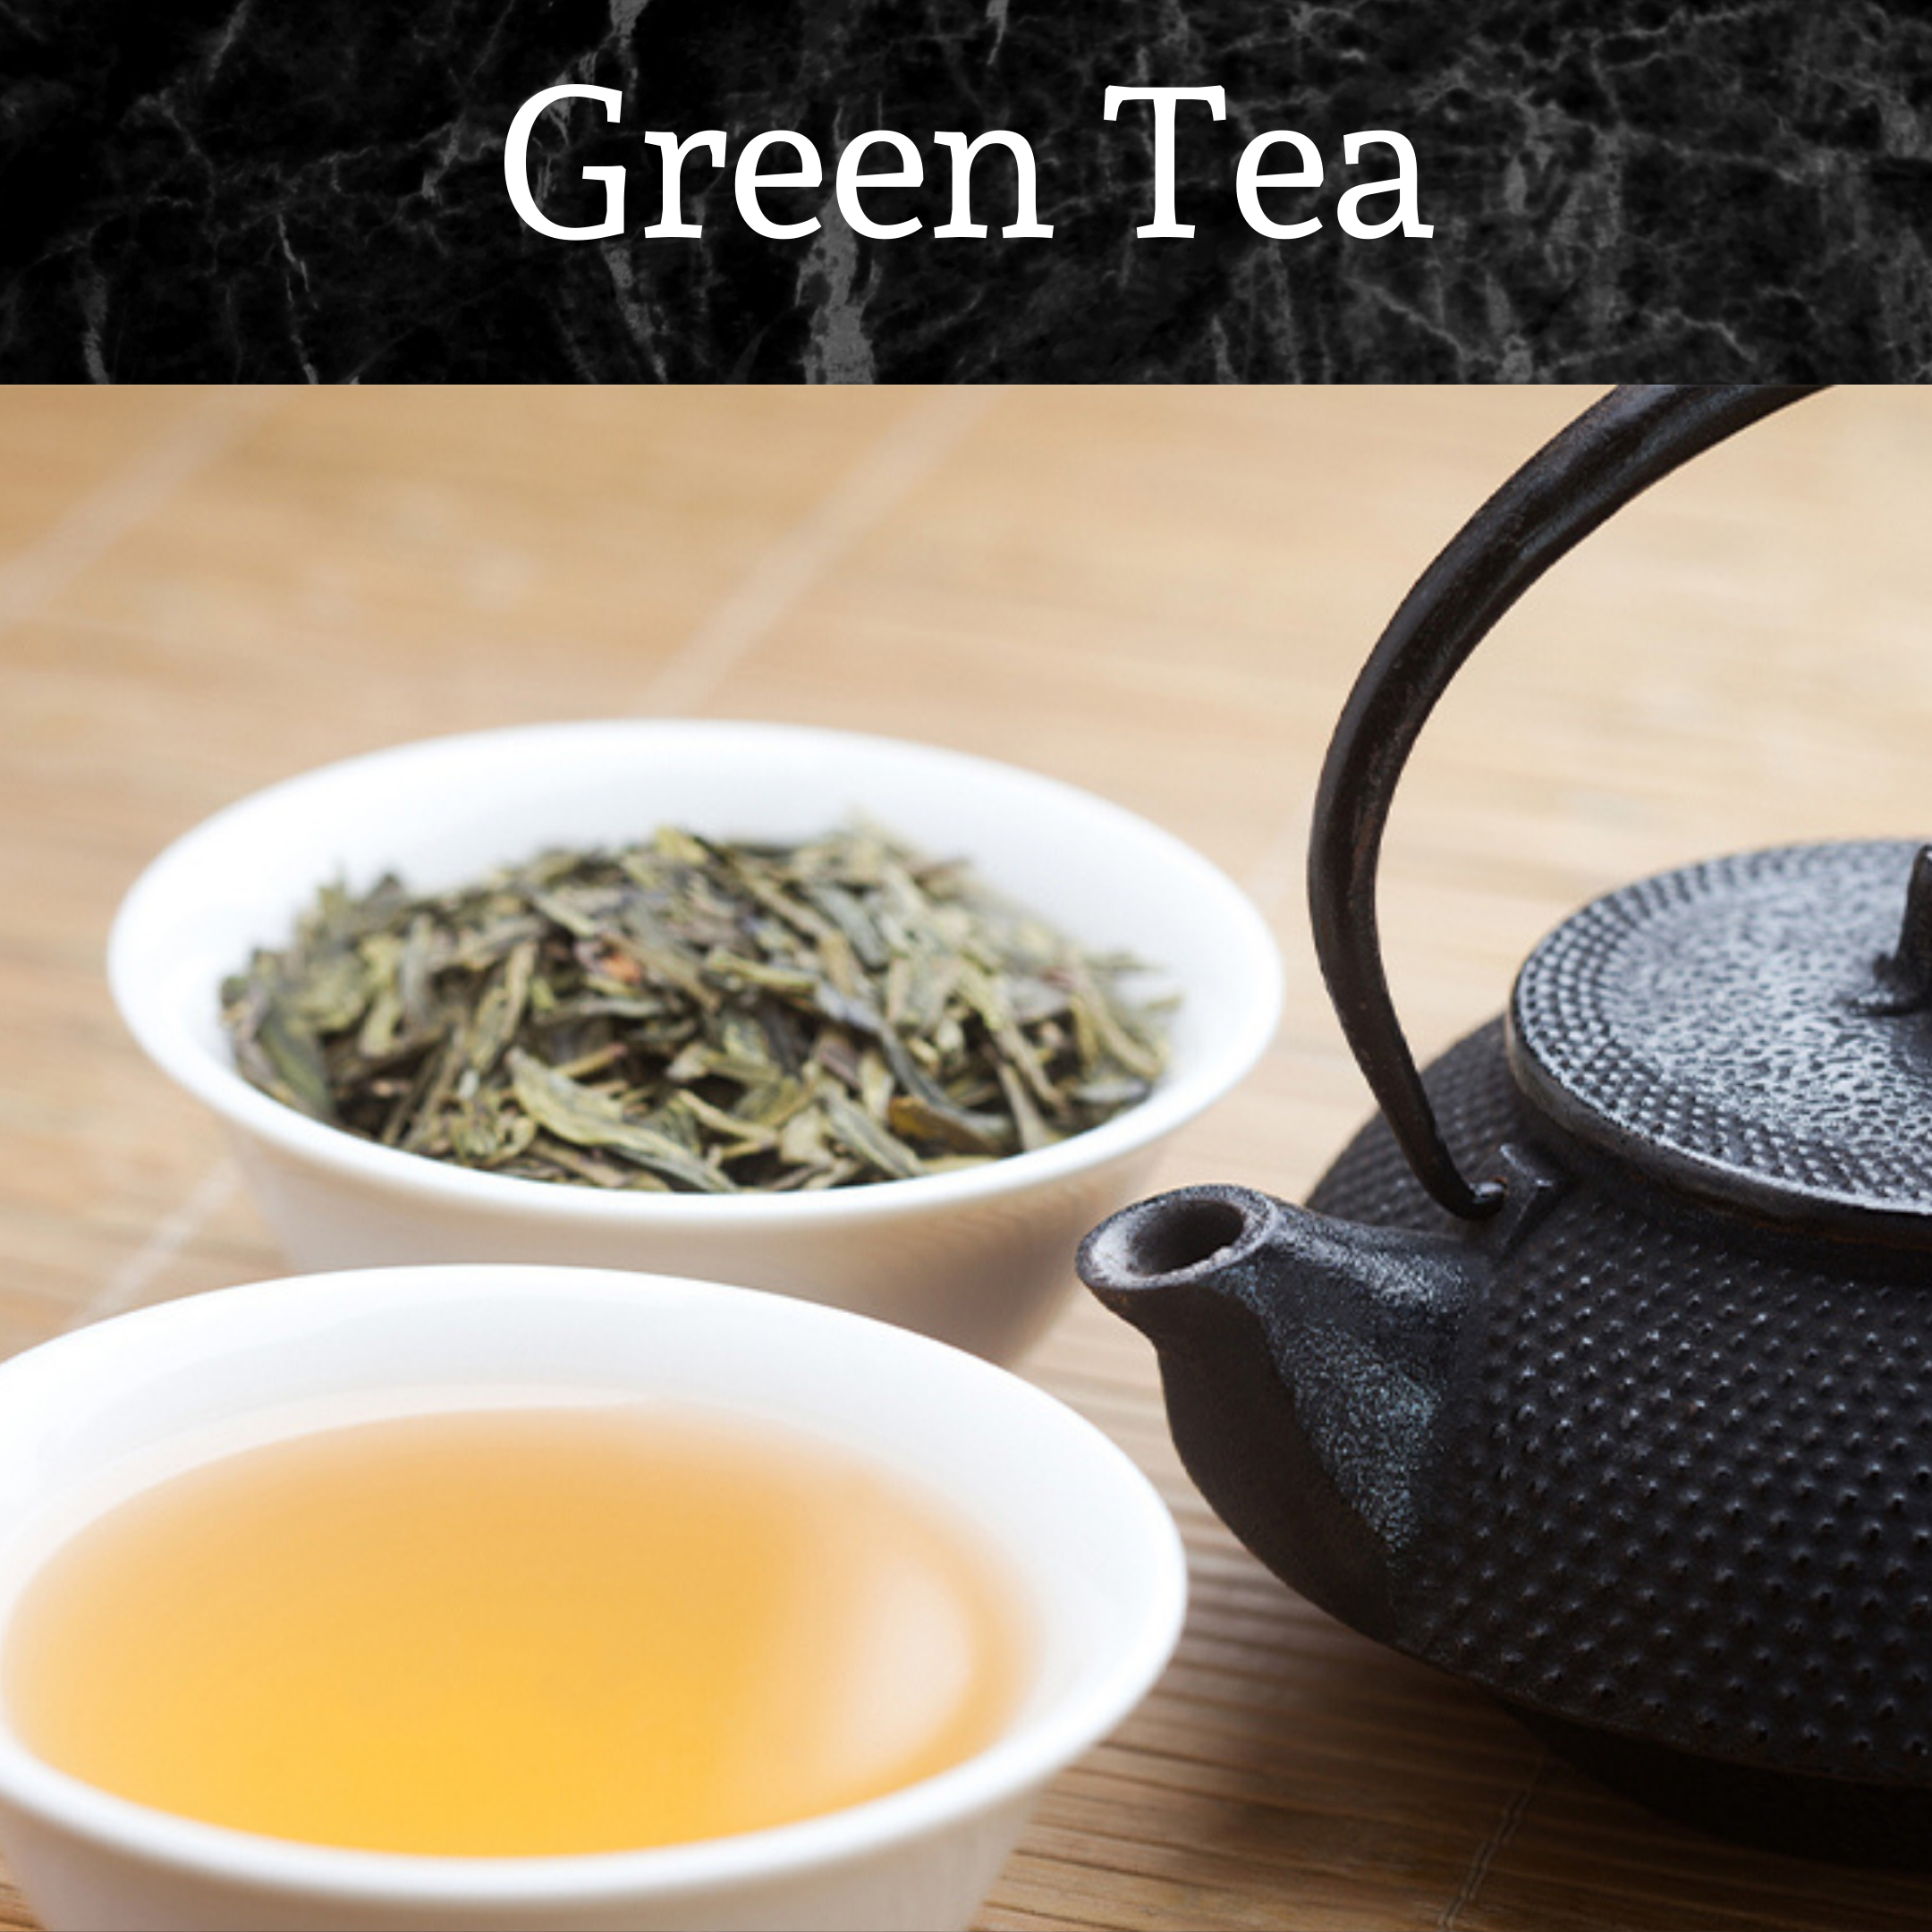 Green tea leaves, brewed tea and a kettle